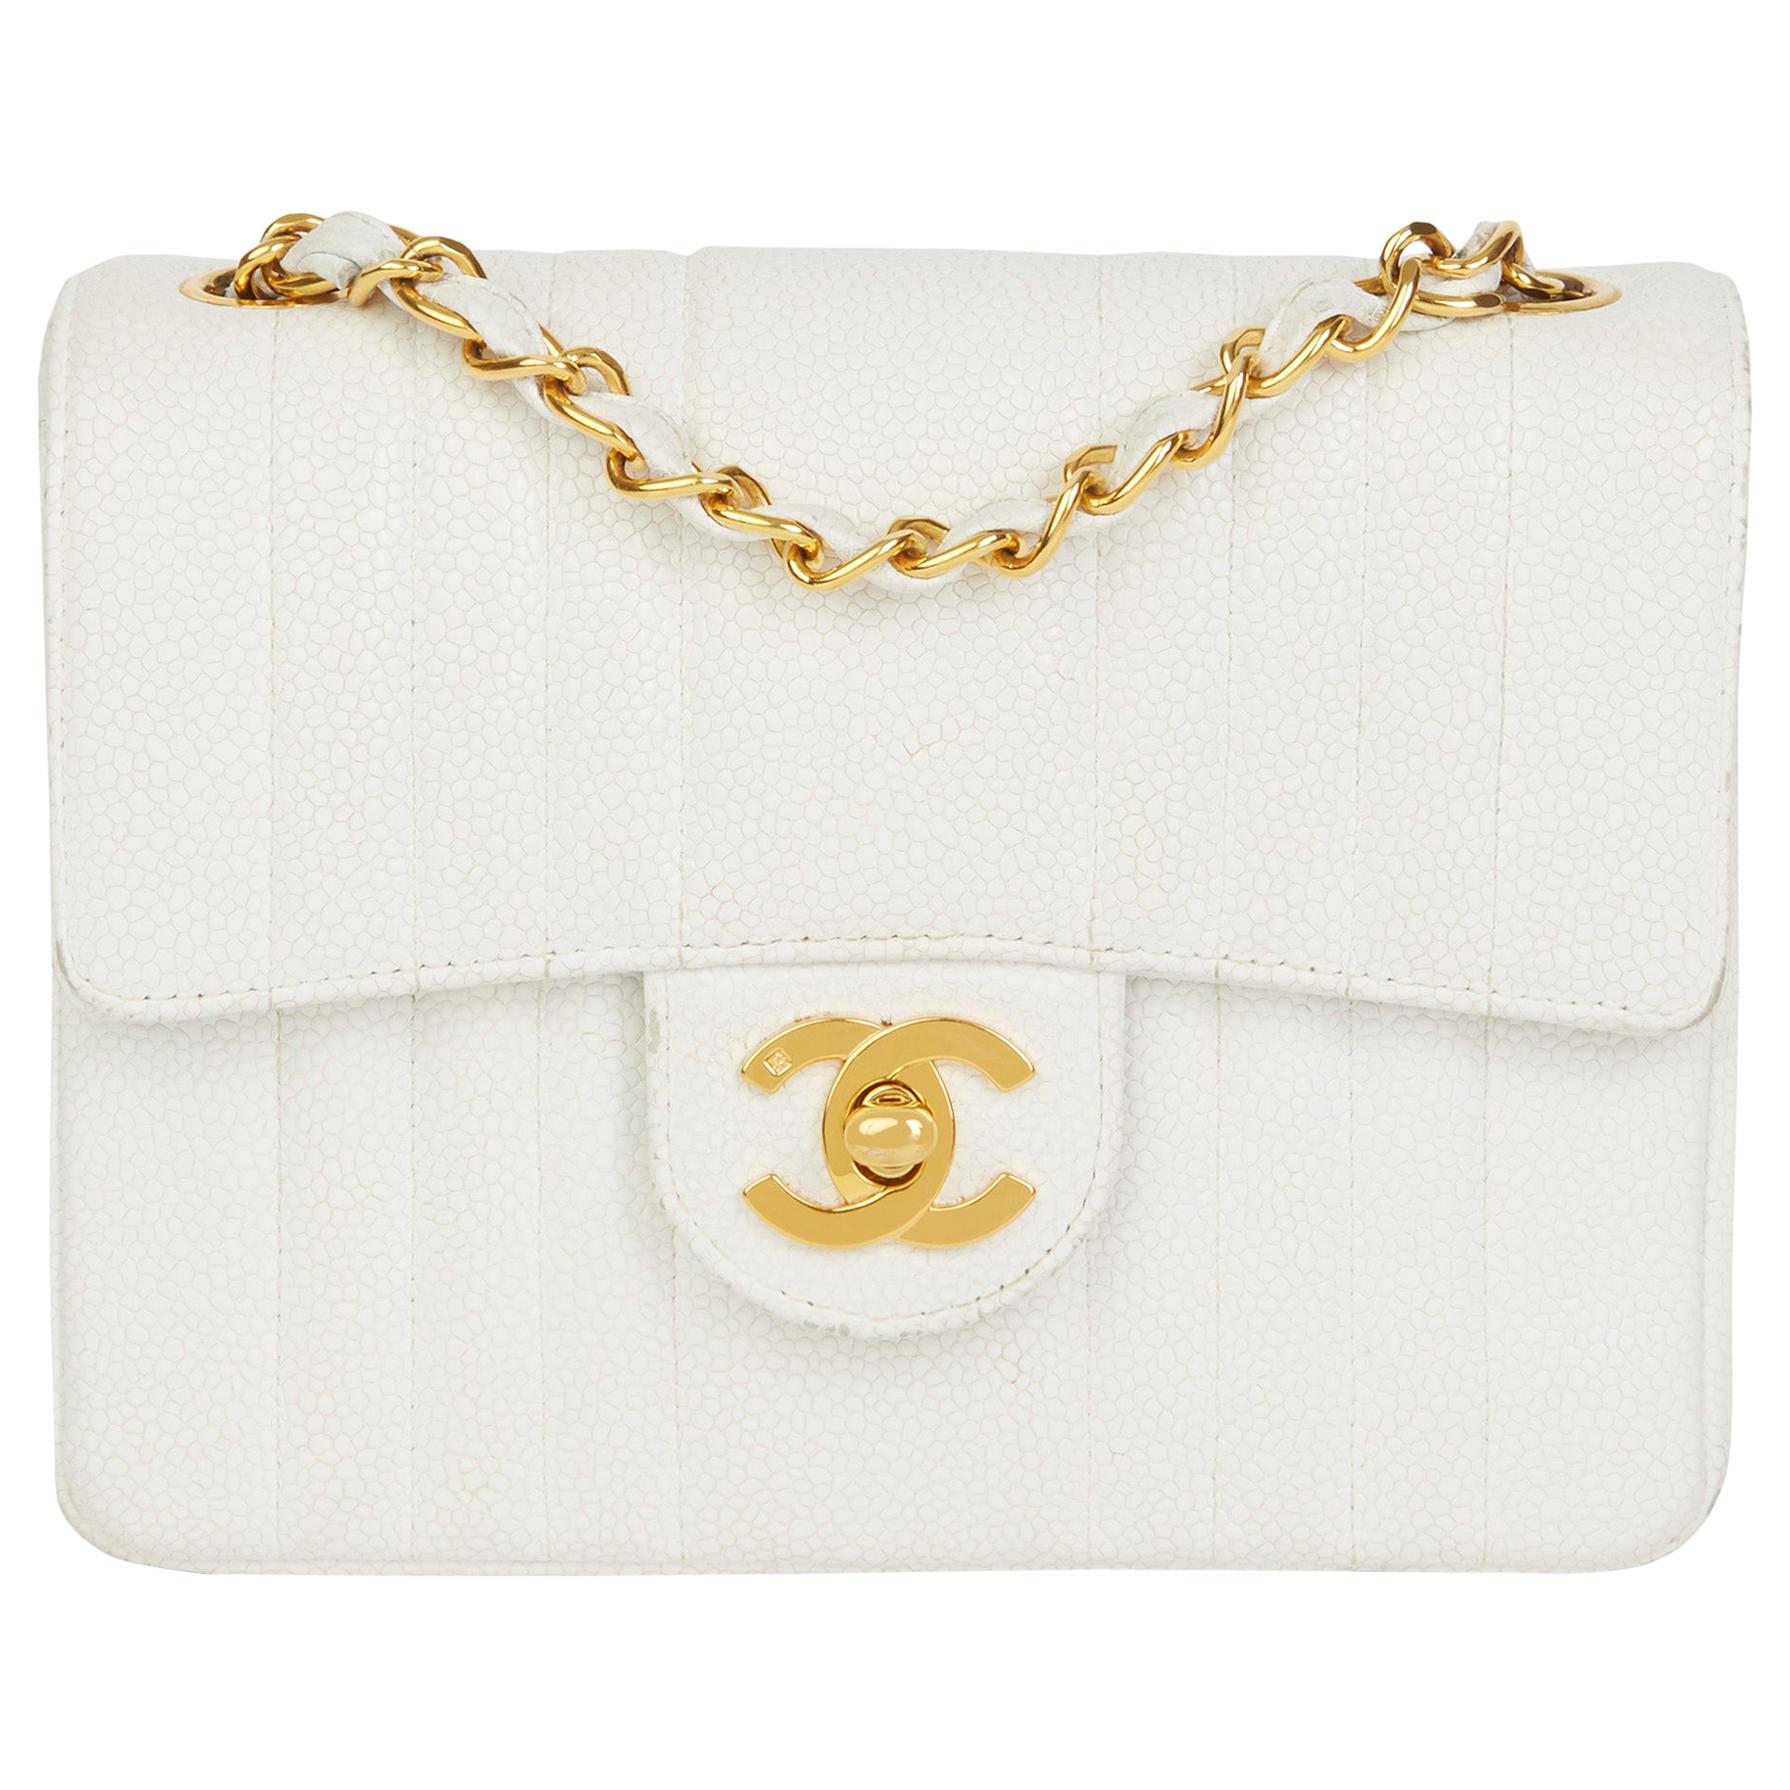 1994 Chanel White Quilted Caviar Leather Vintage Mini Flap Bag